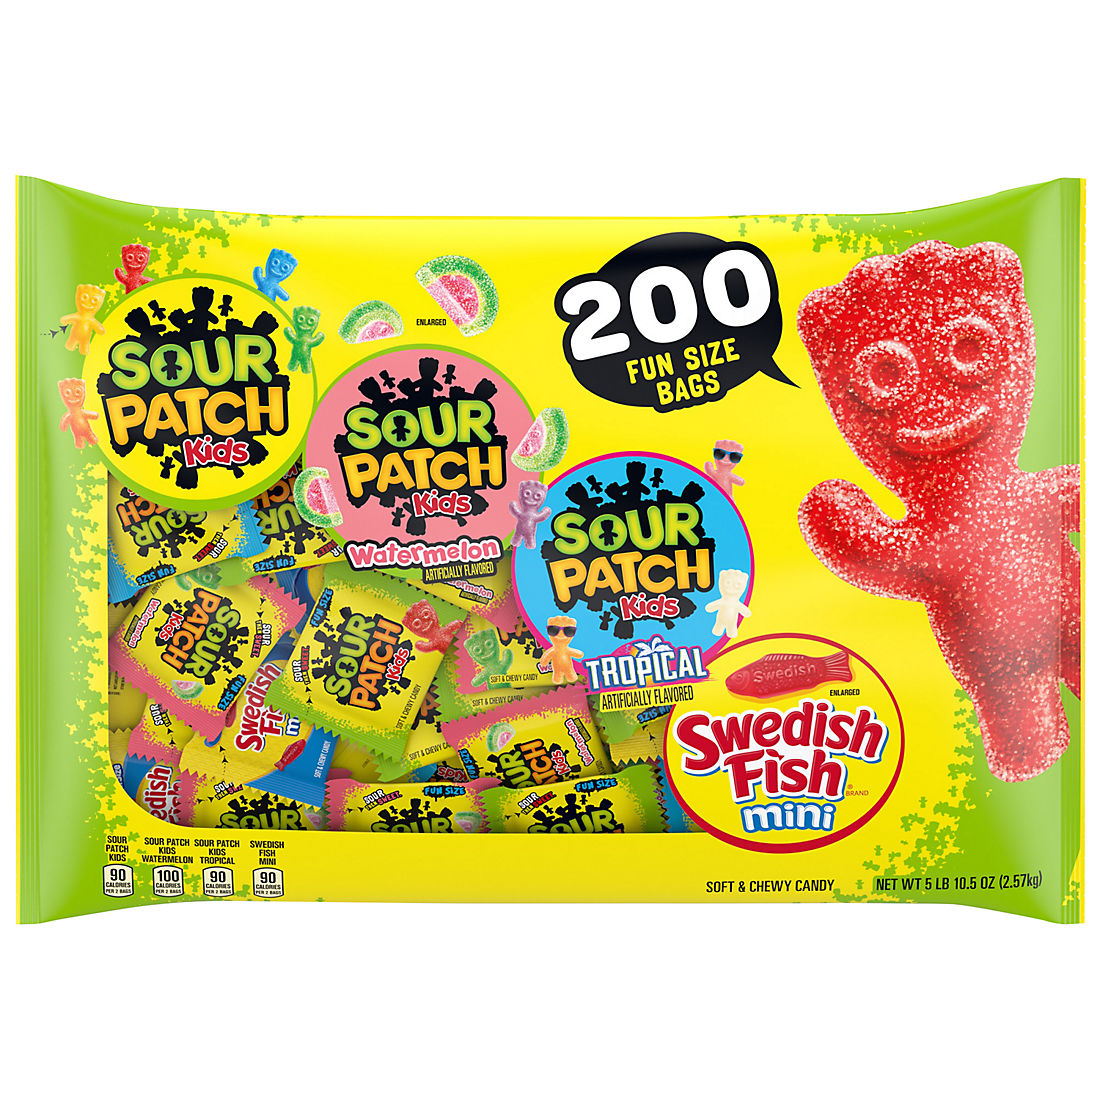 Sour Patch Kids and Swedish Fish Mini and Chewy Candy Packs, 200 pk.